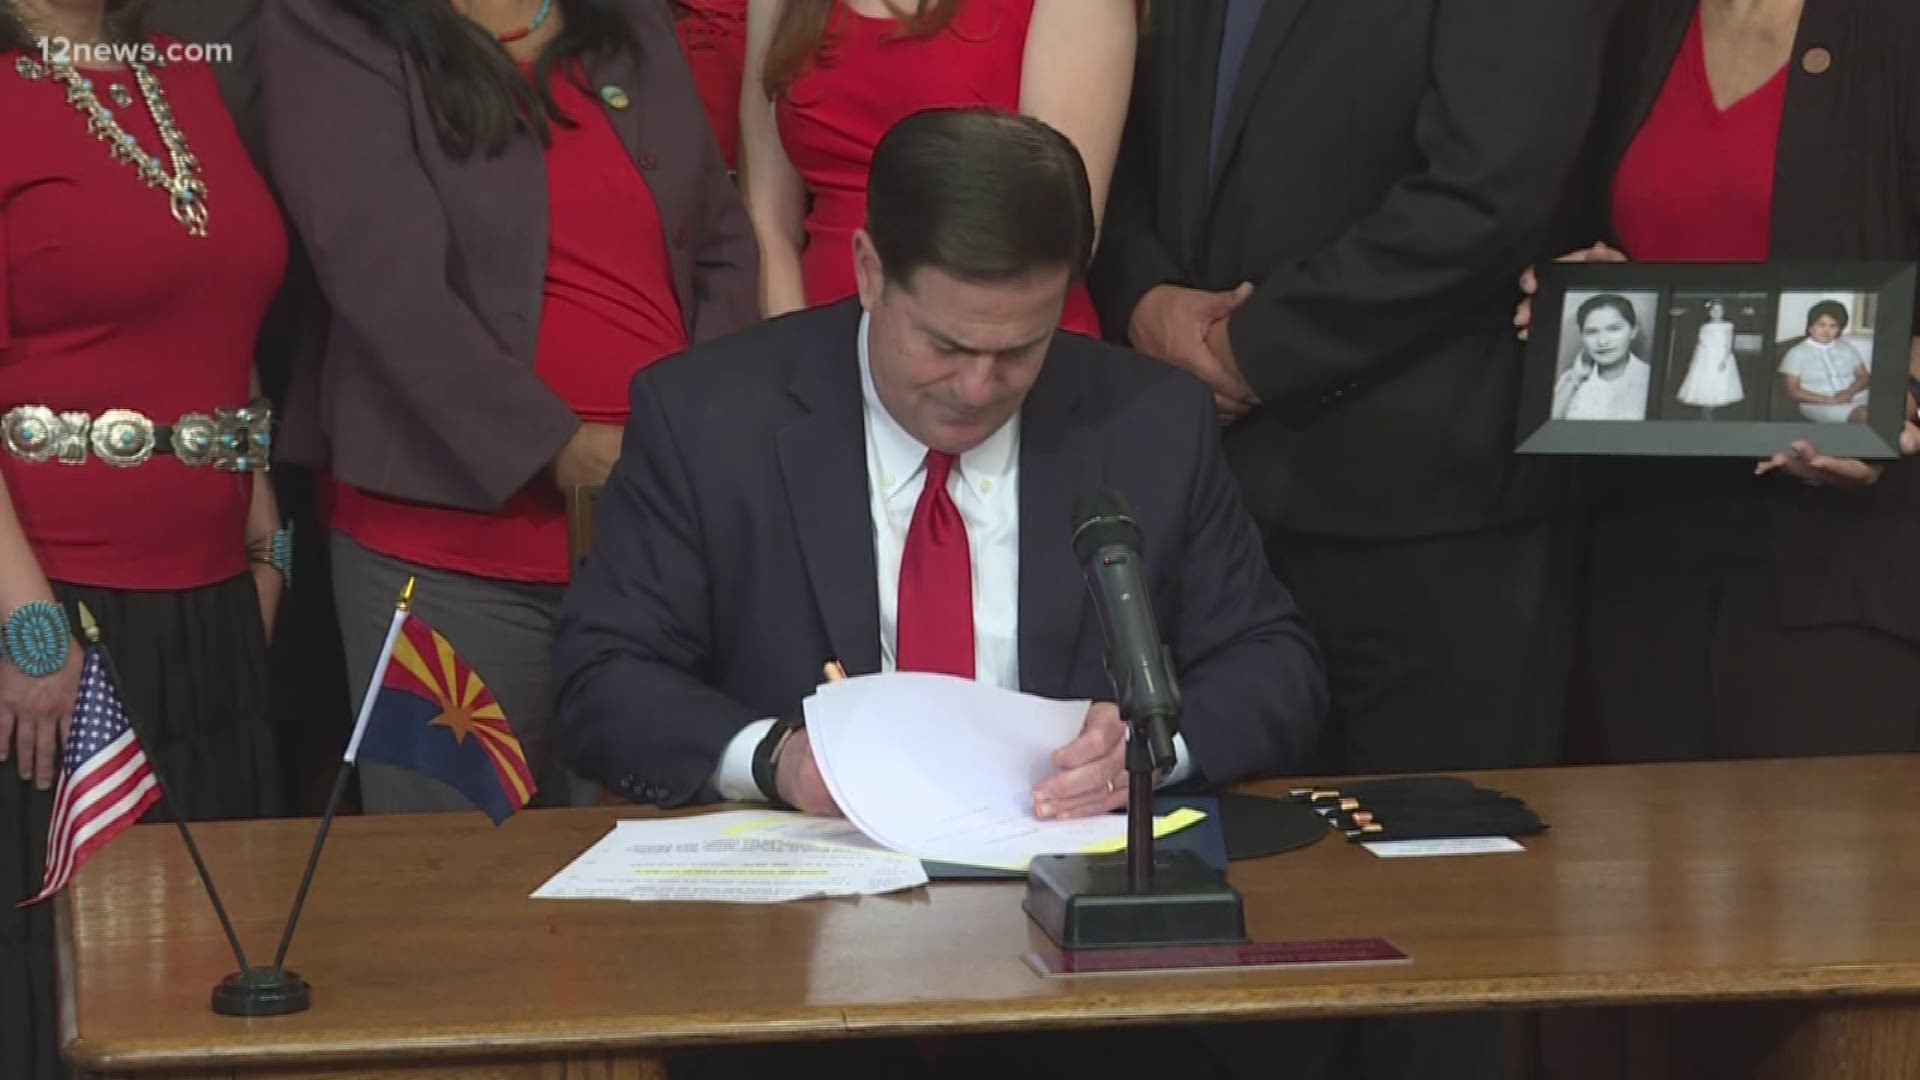 Governor Ducey signed House Bill 2570 Tuesday. The bill was introduced by Representative Jennifer Jermaine. It will create a 21 member study committee on missing and murdered Indigenous women and girls. The Governor says the goal is to figure out a way to reduce and end violence against Indigenous women.